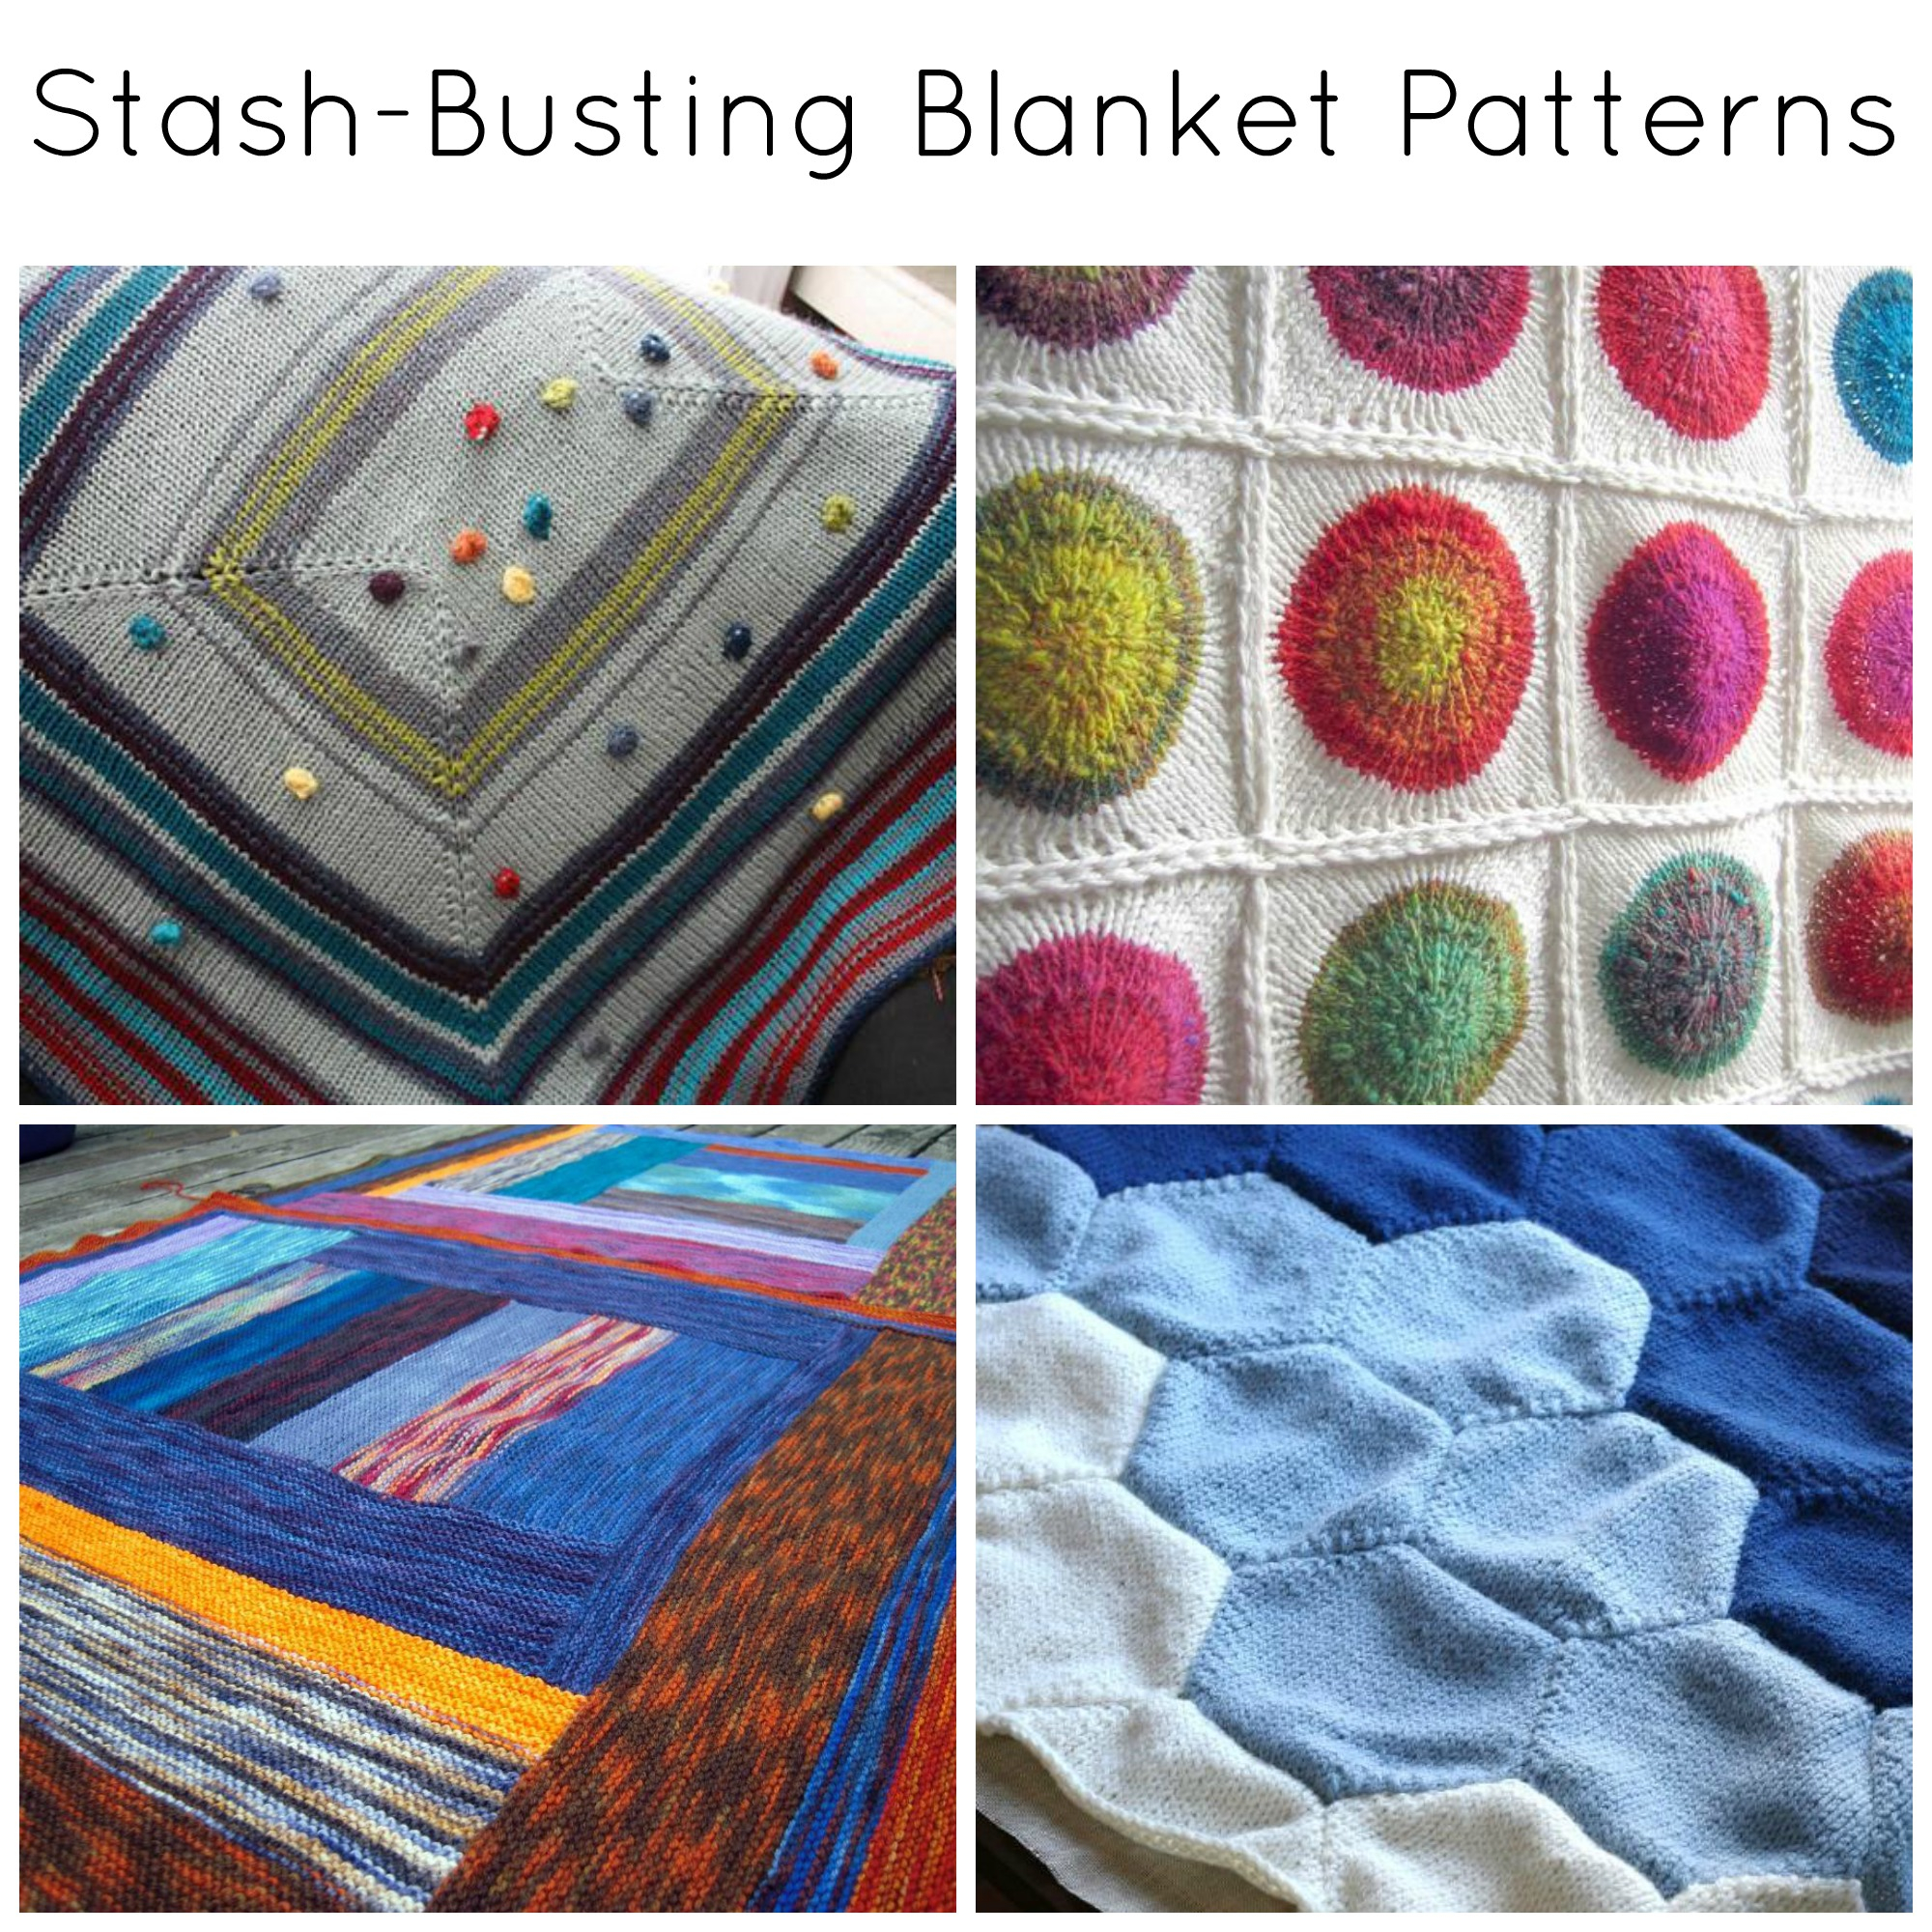 Knitted Quilt Block Patterns 12 Stash Busting Blanket Patterns To Knit